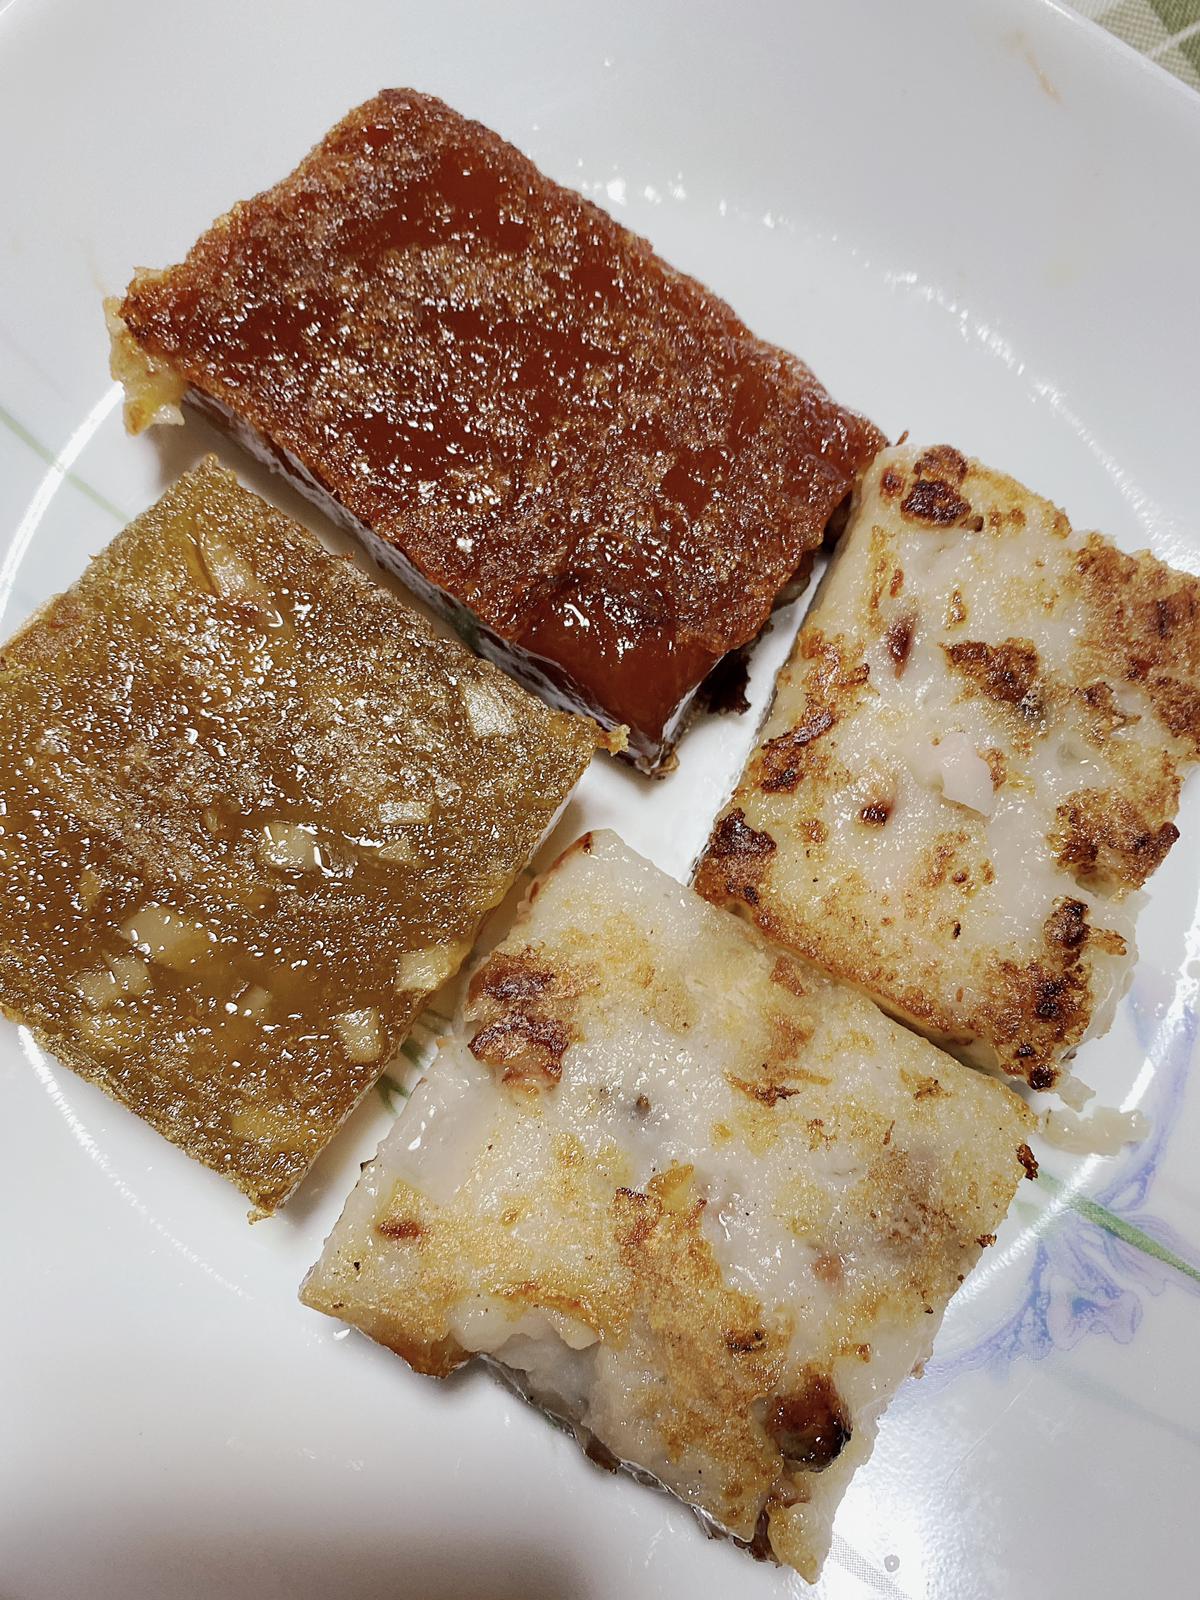 Cakes to celebrate Lunar New Year 賀年糕點